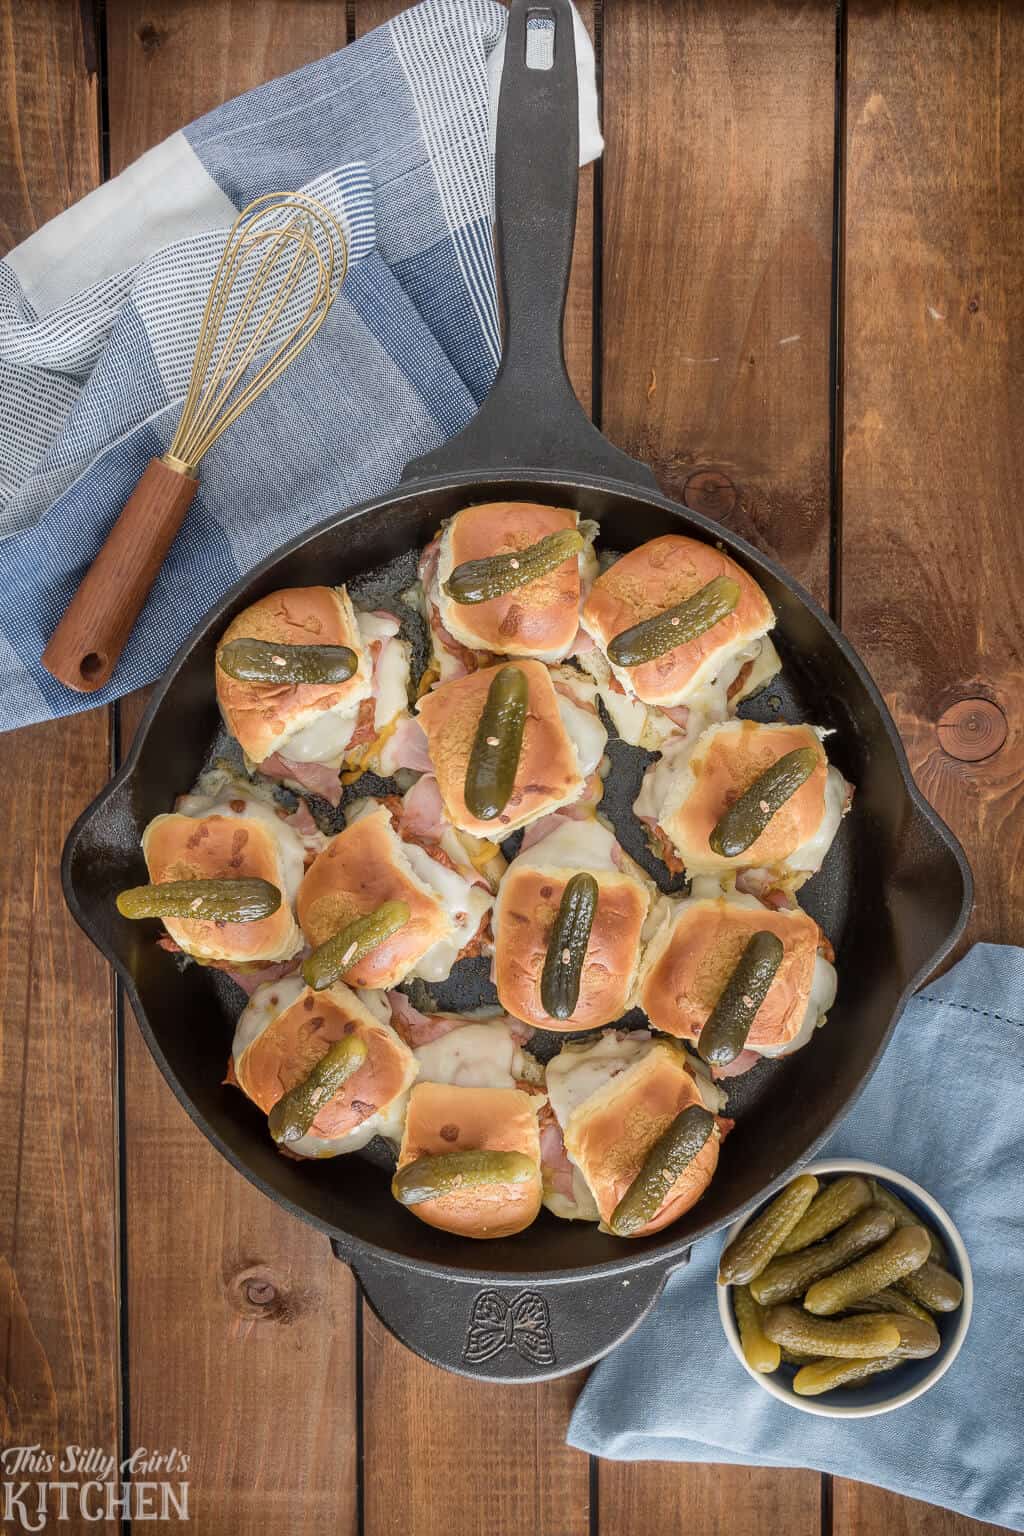 Overhead of sandwiches in cast iron skillet topped with pickles.